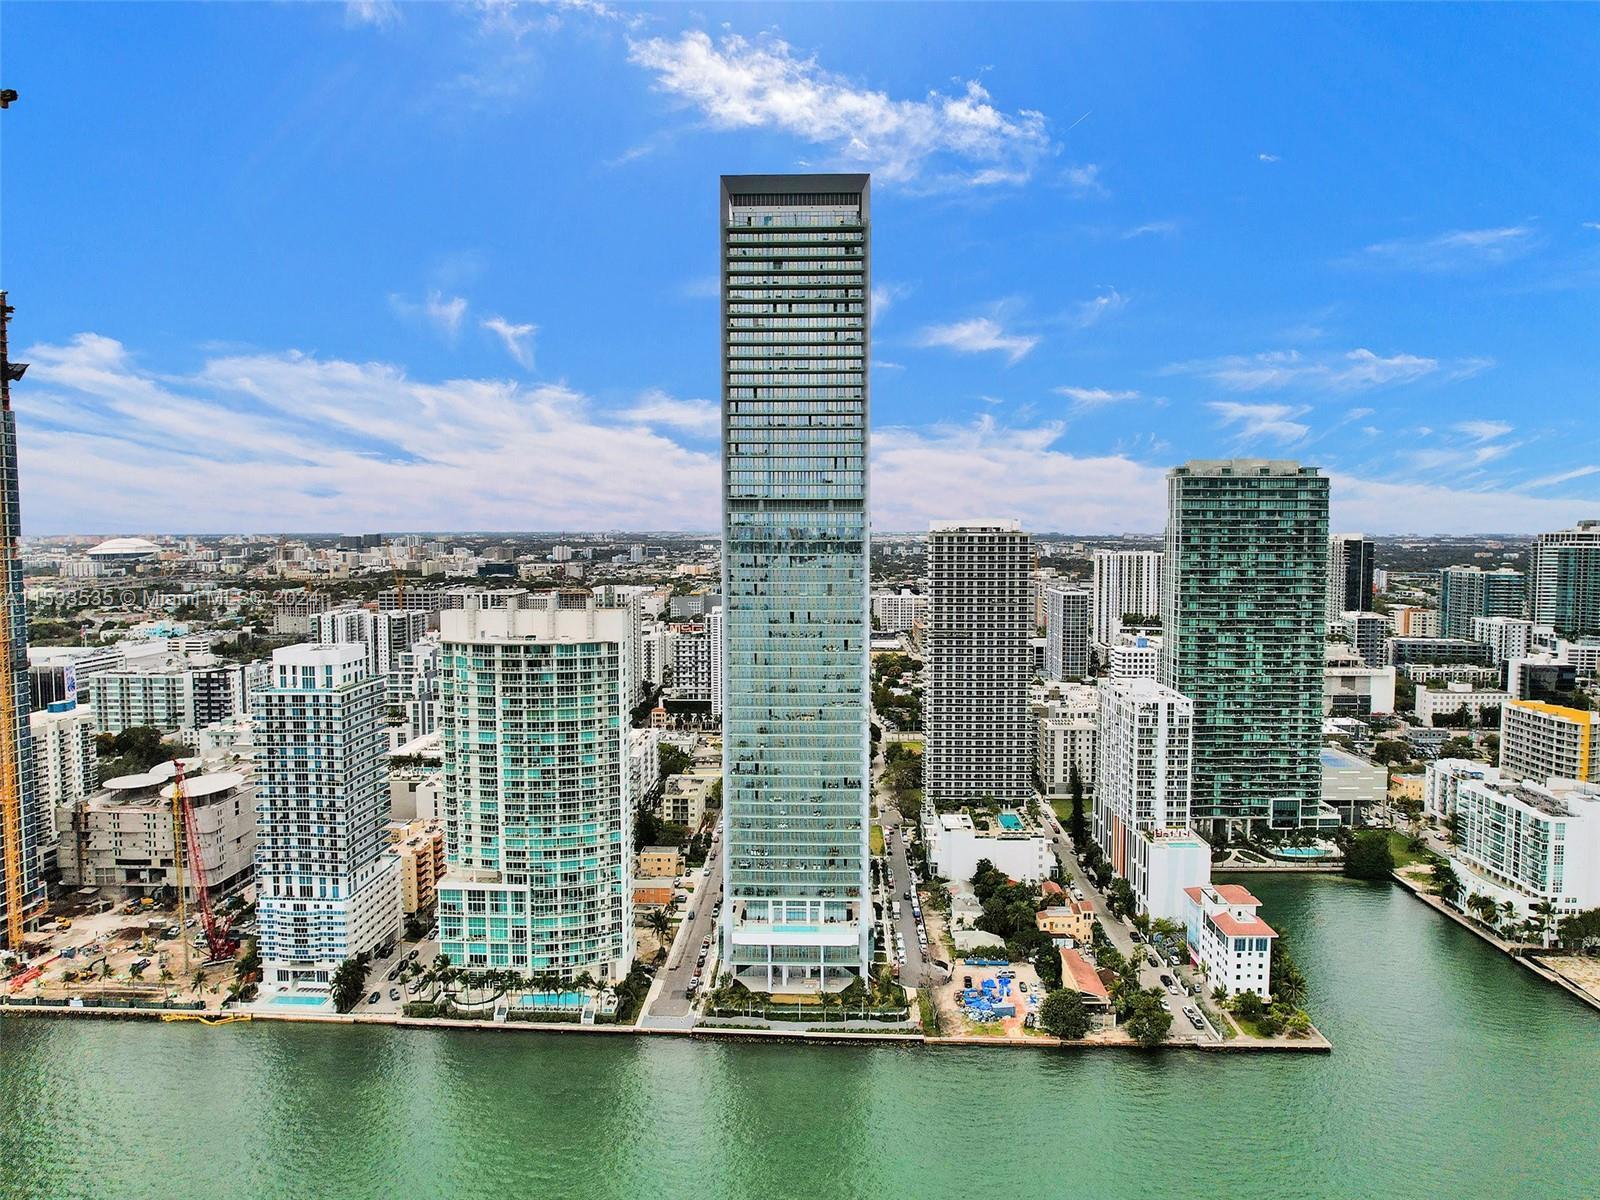 Introducing the latest addition to Miami's skyline - Missoni Baia. Nestled in the upscale Edgewater 